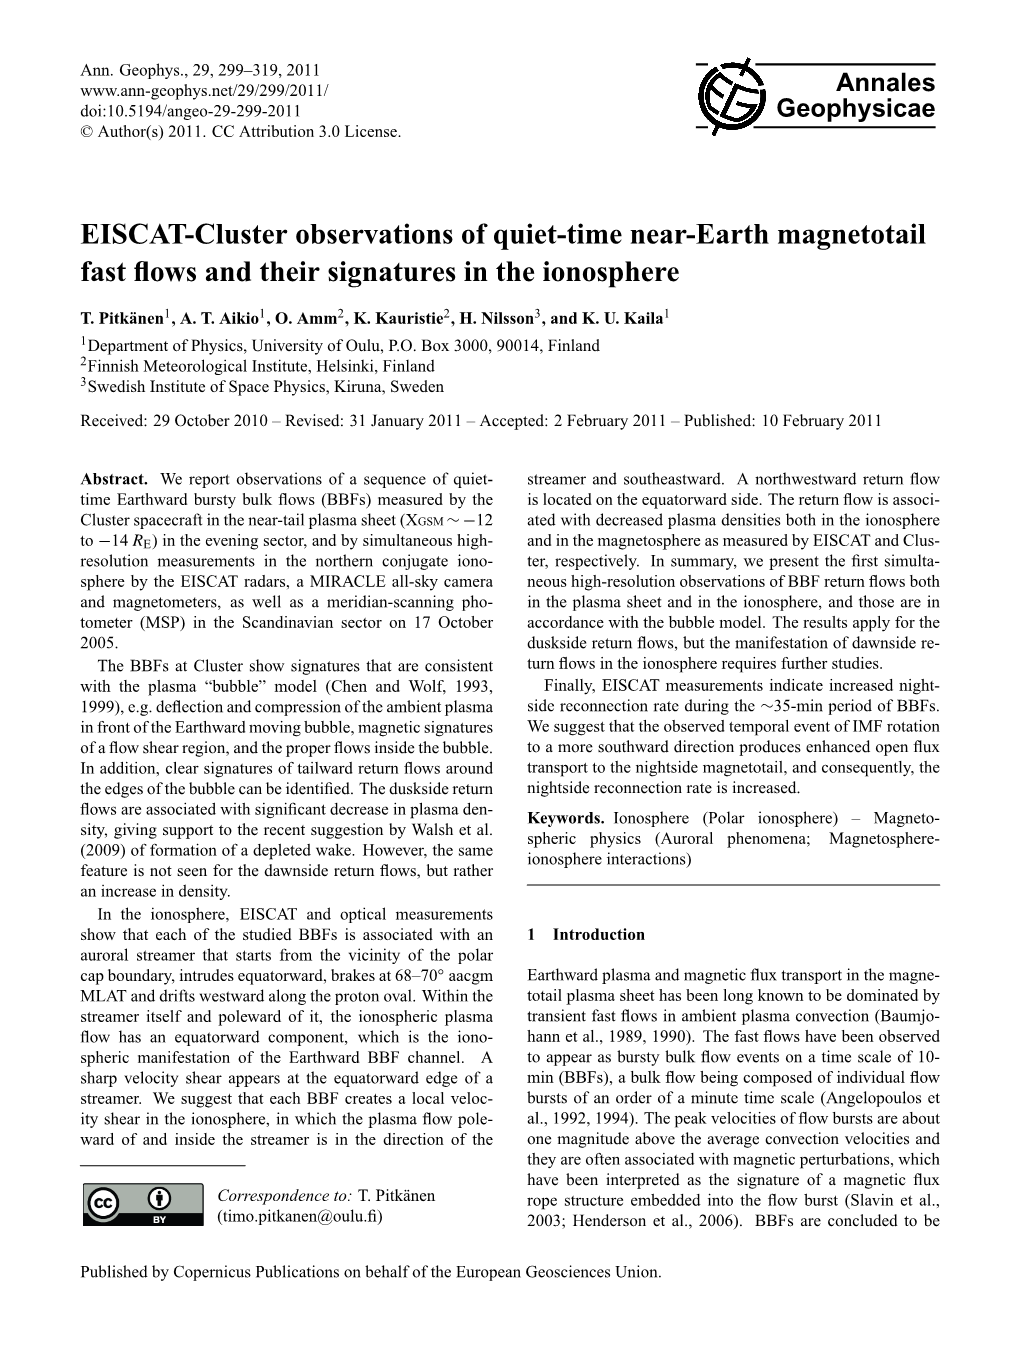 EISCAT-Cluster Observations of Quiet-Time Near-Earth Magnetotail Fast ﬂows and Their Signatures in the Ionosphere